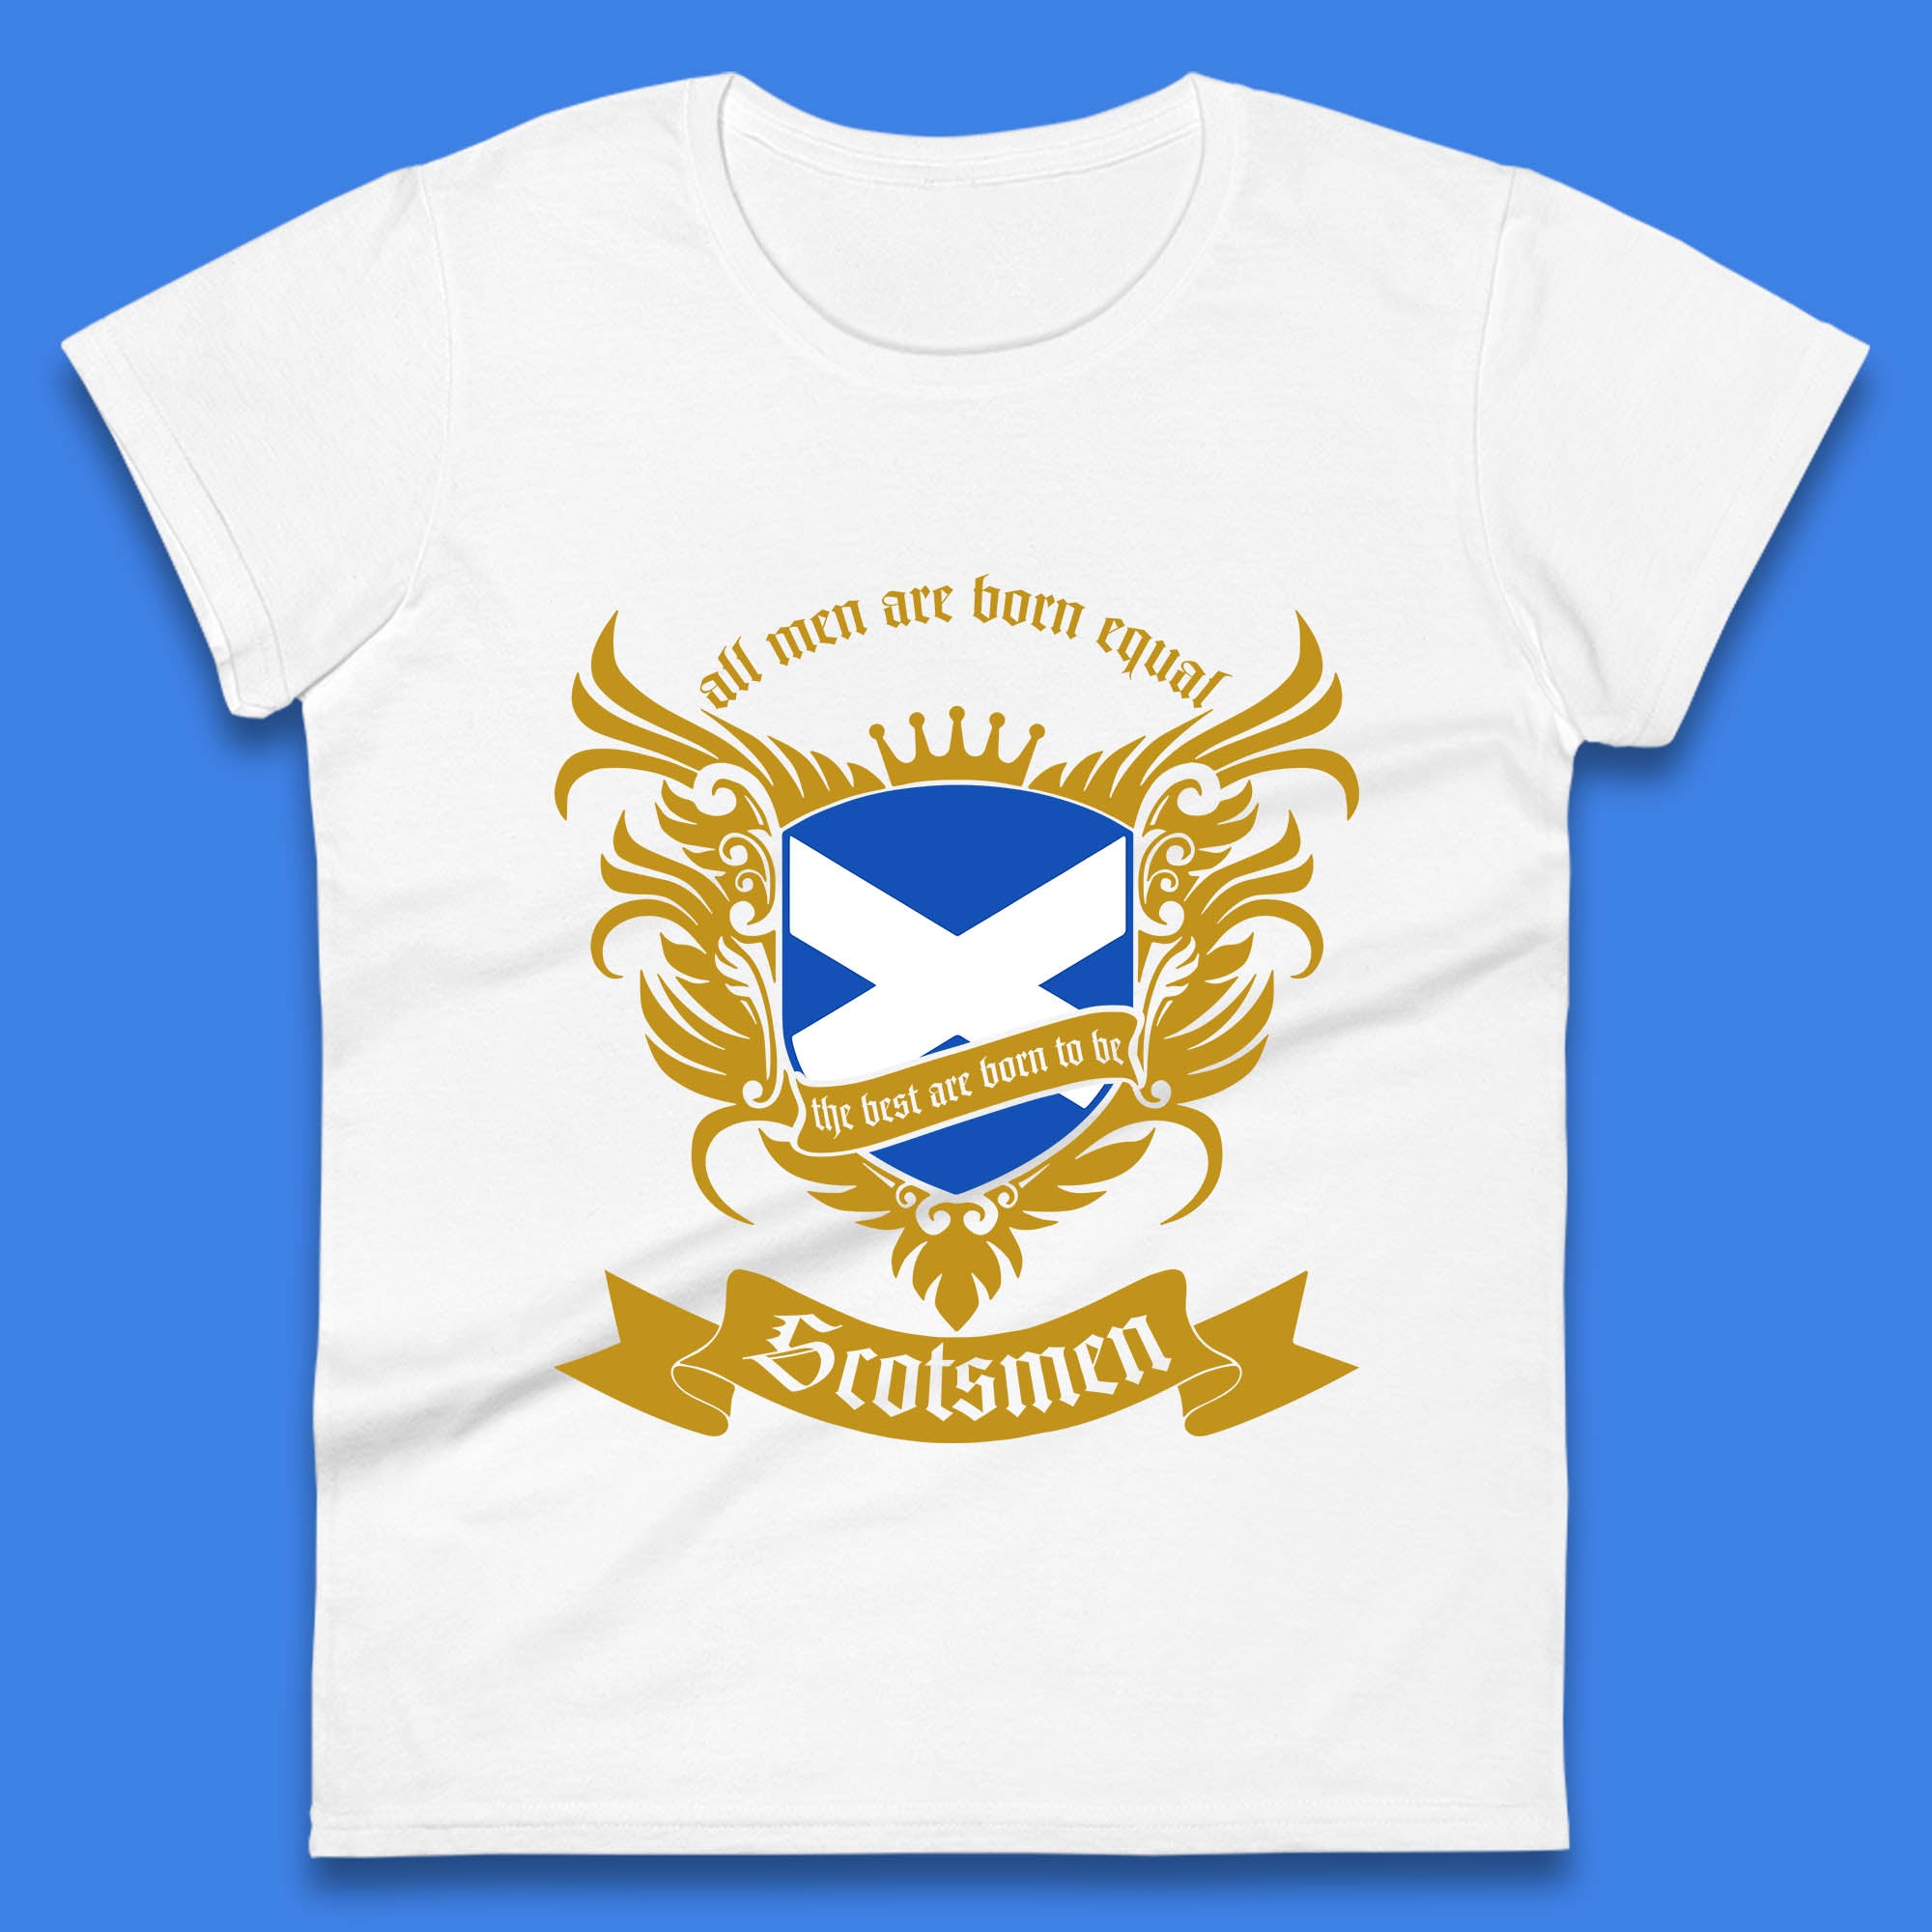 All Men Are Born Equal The Best Are Born To Be Scotsmen Scottish Flag Scotland Football St Andrews Day Womens Tee Top